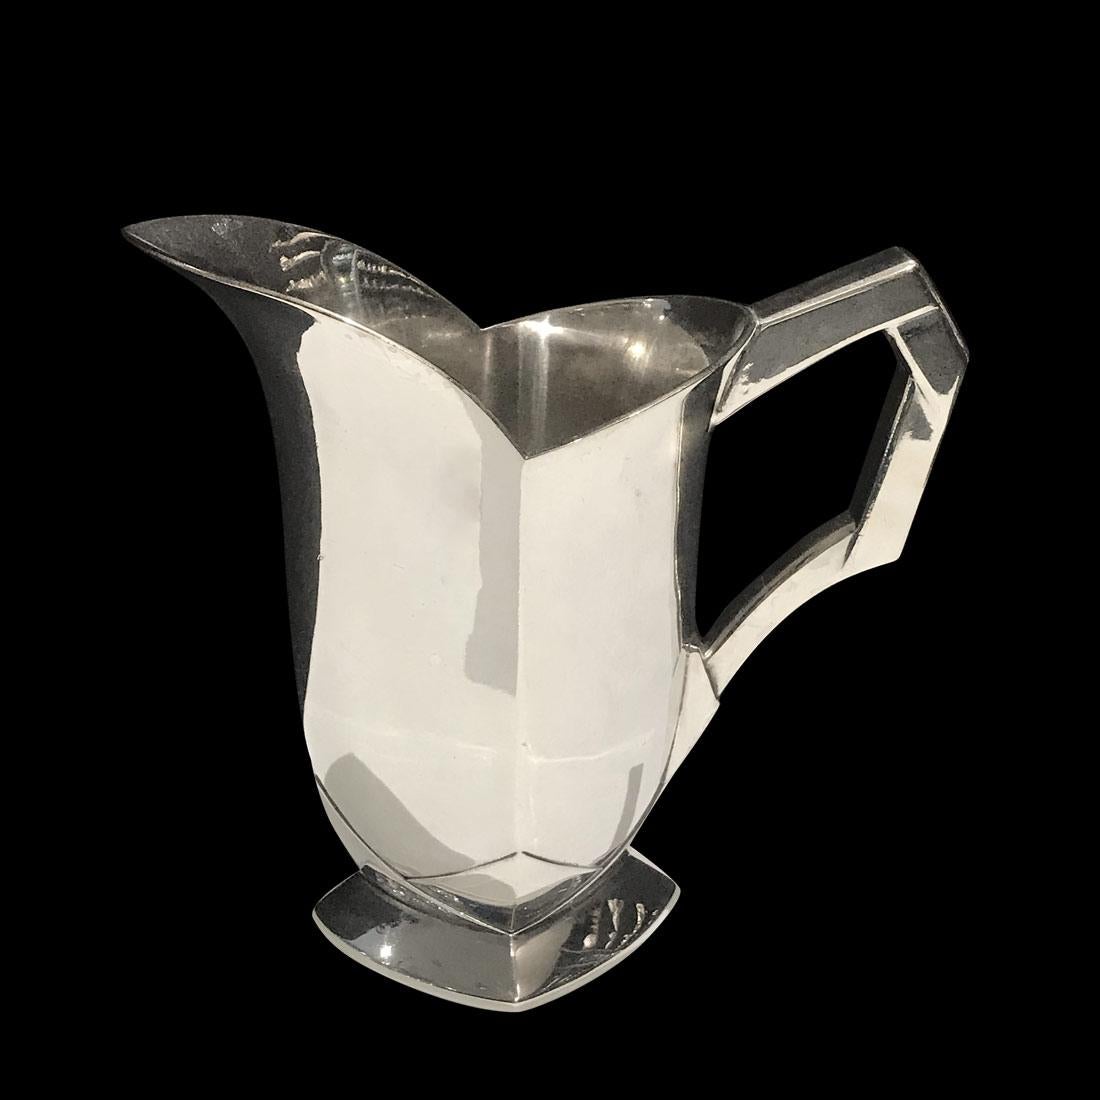 Art Deco jug by Louis Süe(1875-1968) & André Mare (1887-1932) for Gallia - Christofle. Silverplated with plant motifs in low-relief.
Stamped underneath 